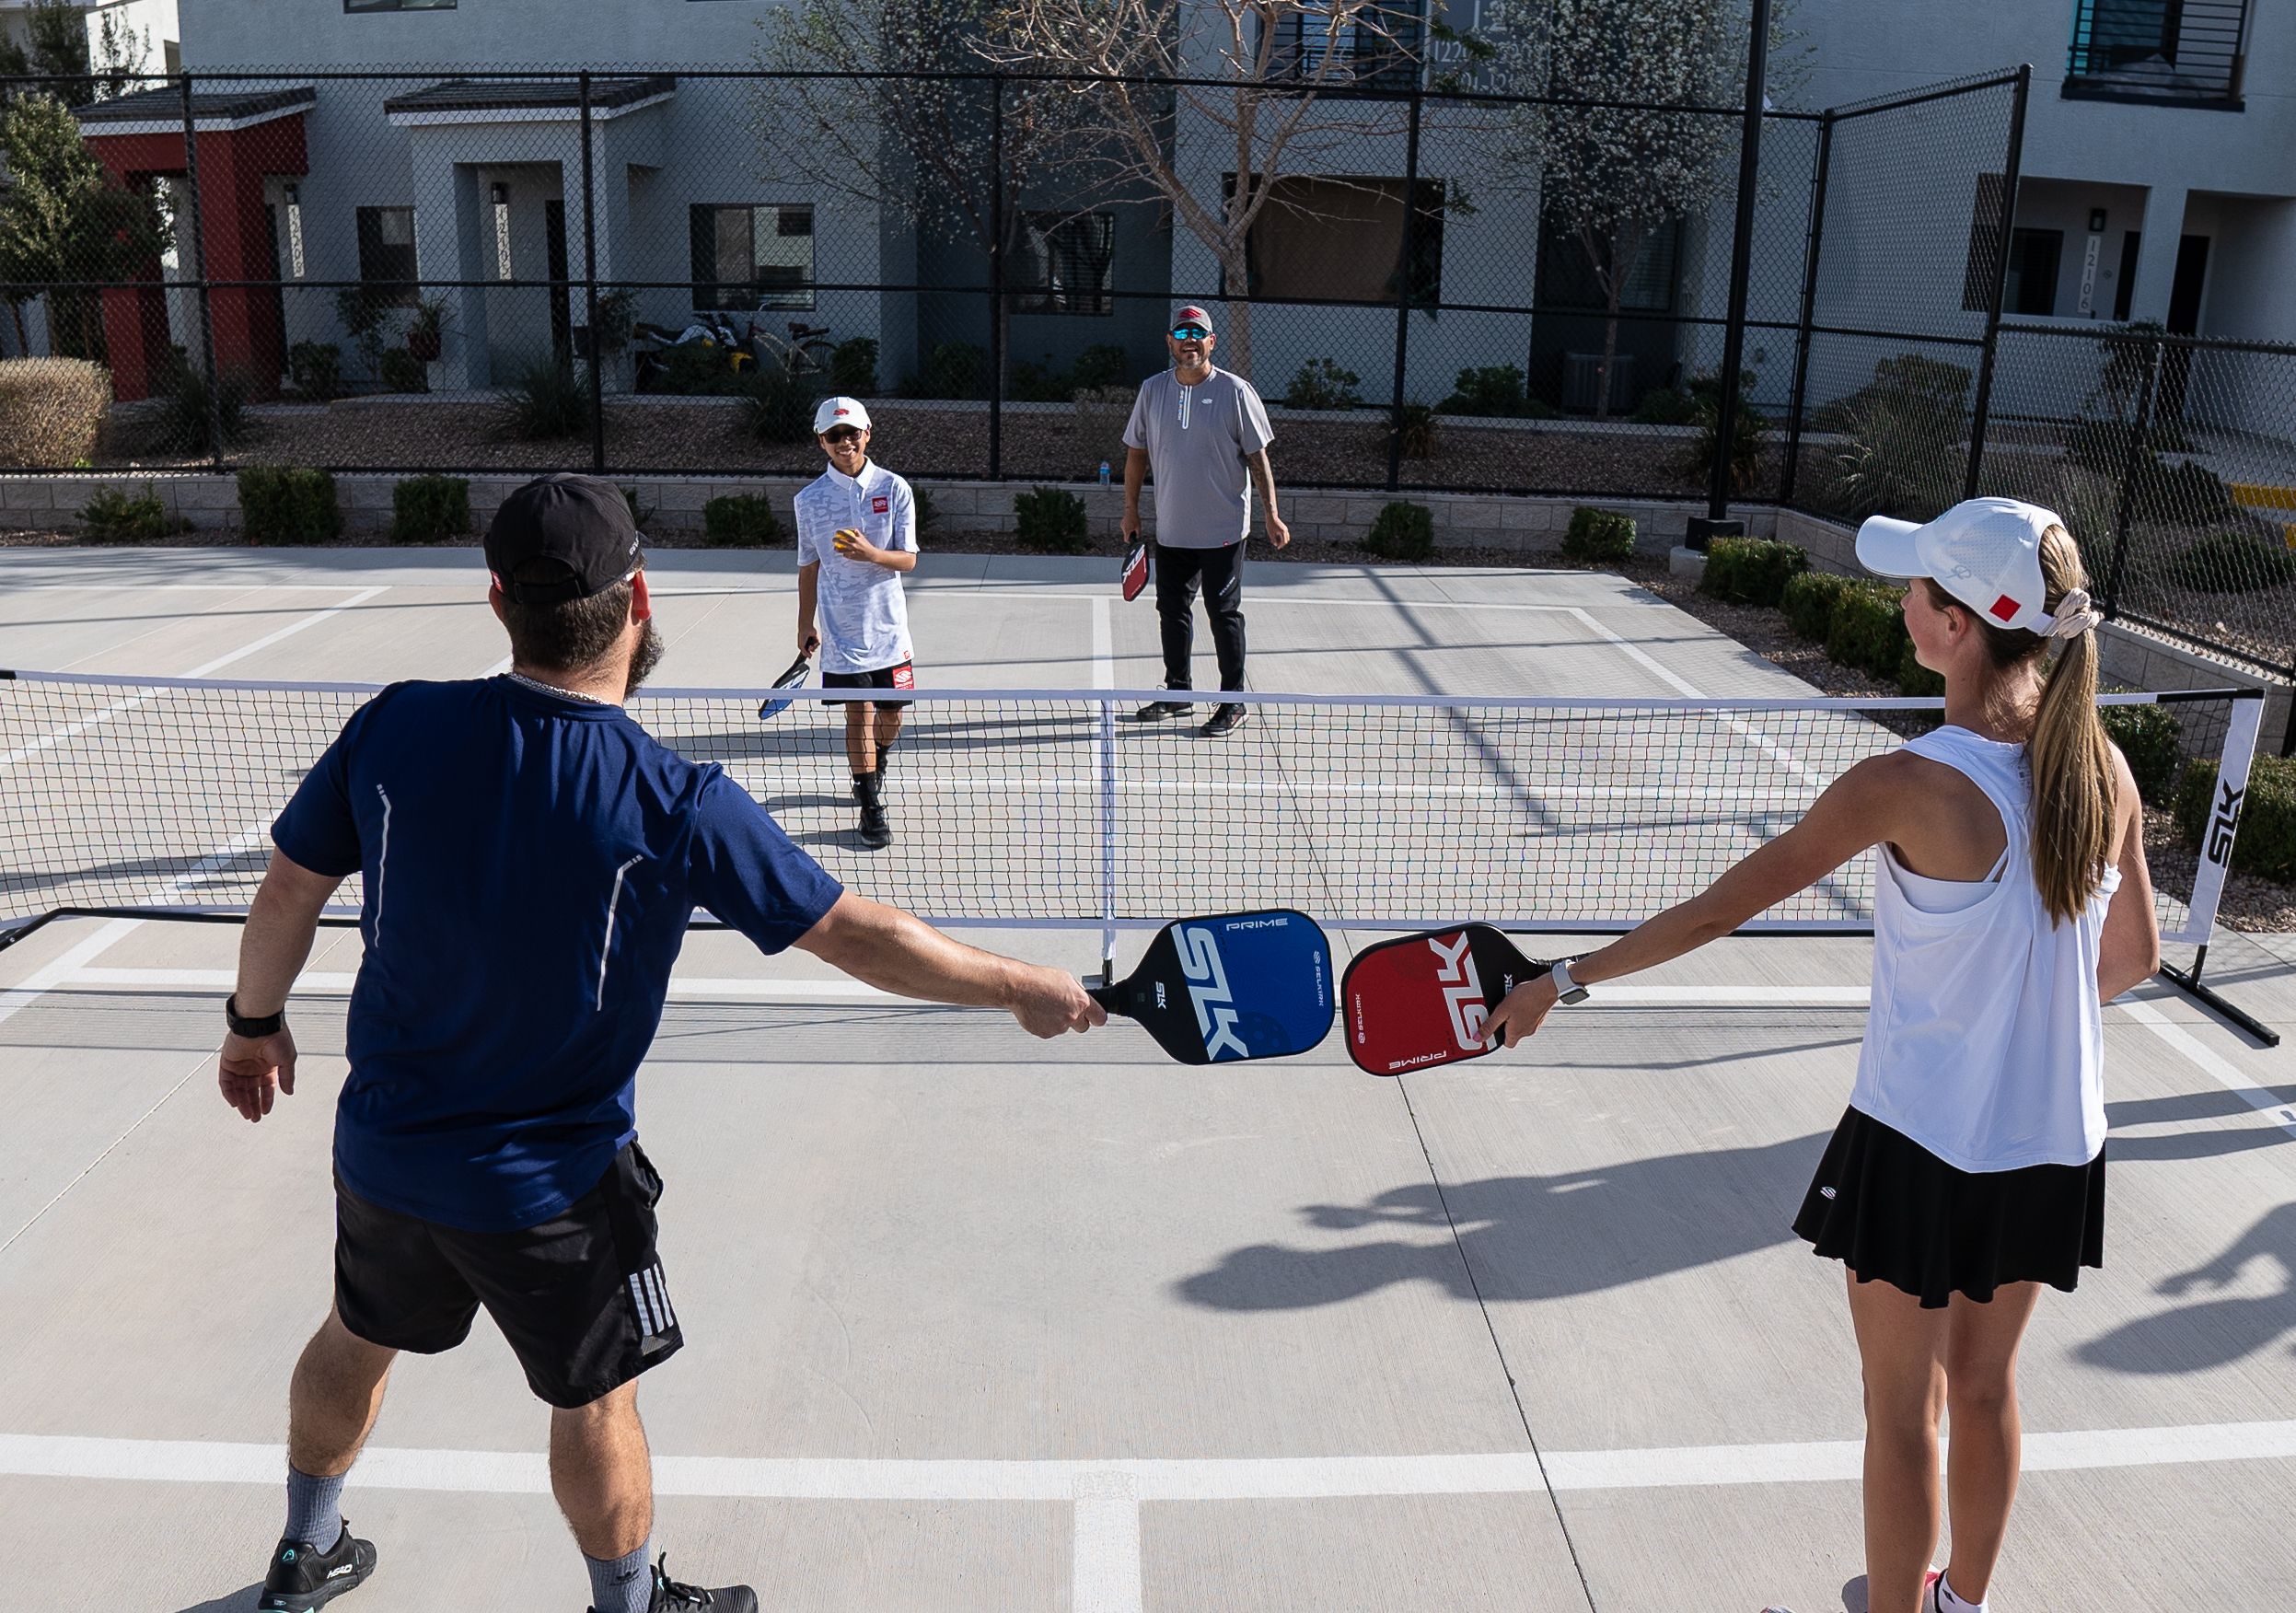 Although it has been around since the 1960s, pickleball has gained a lot of popularity over the last 10 years. But why is pickleball so popular, and should you consider playing?